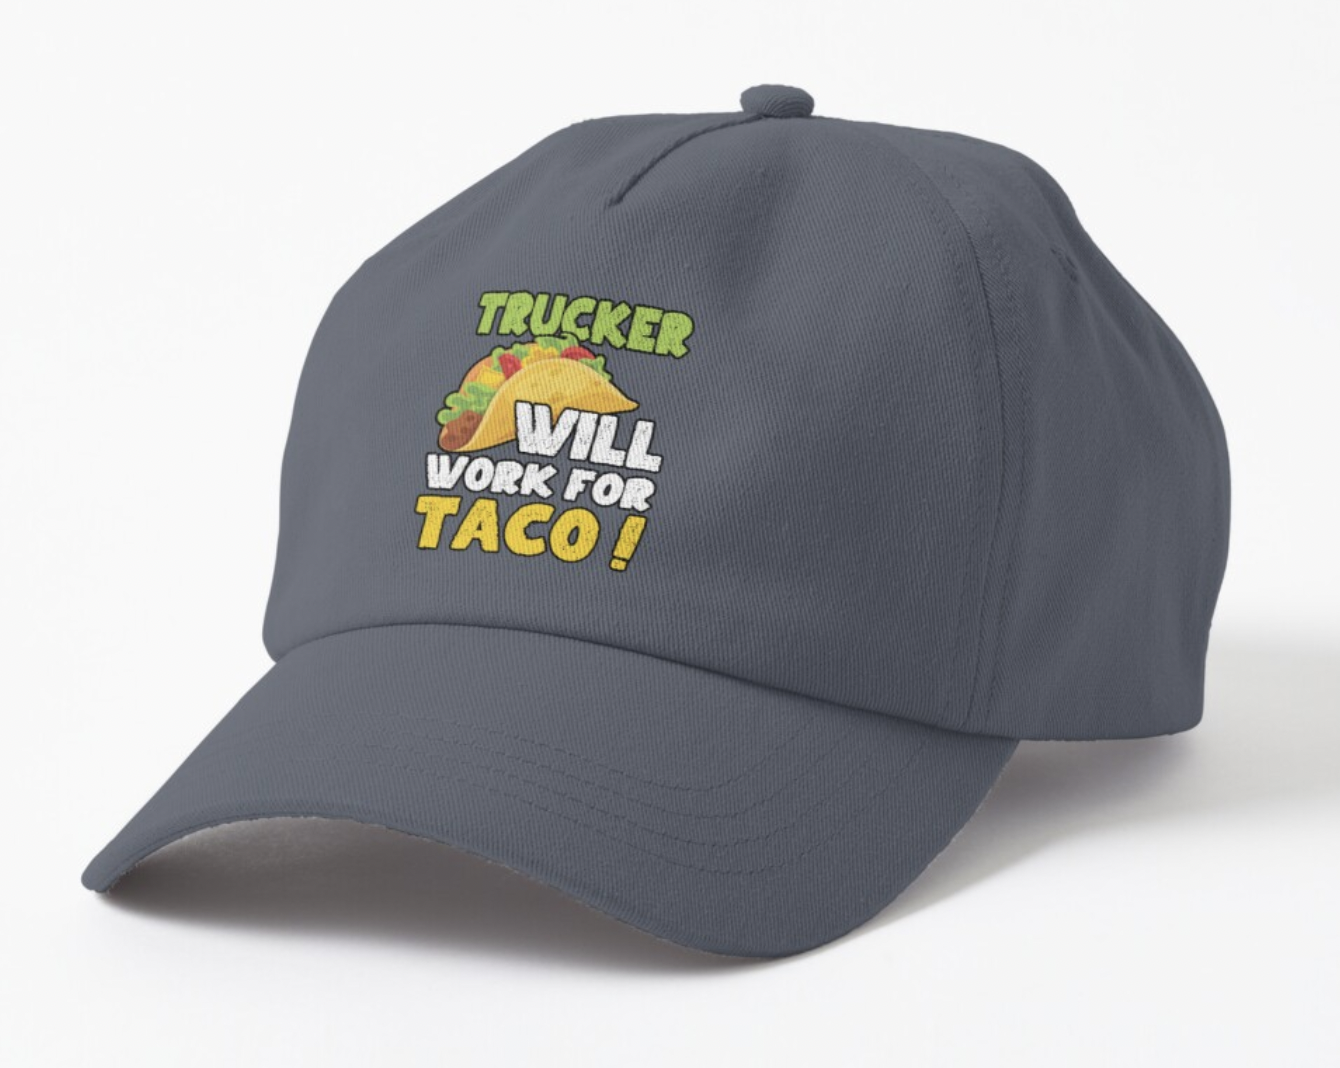 40 Funny Trucker Hats That Will Compel You to Buy One